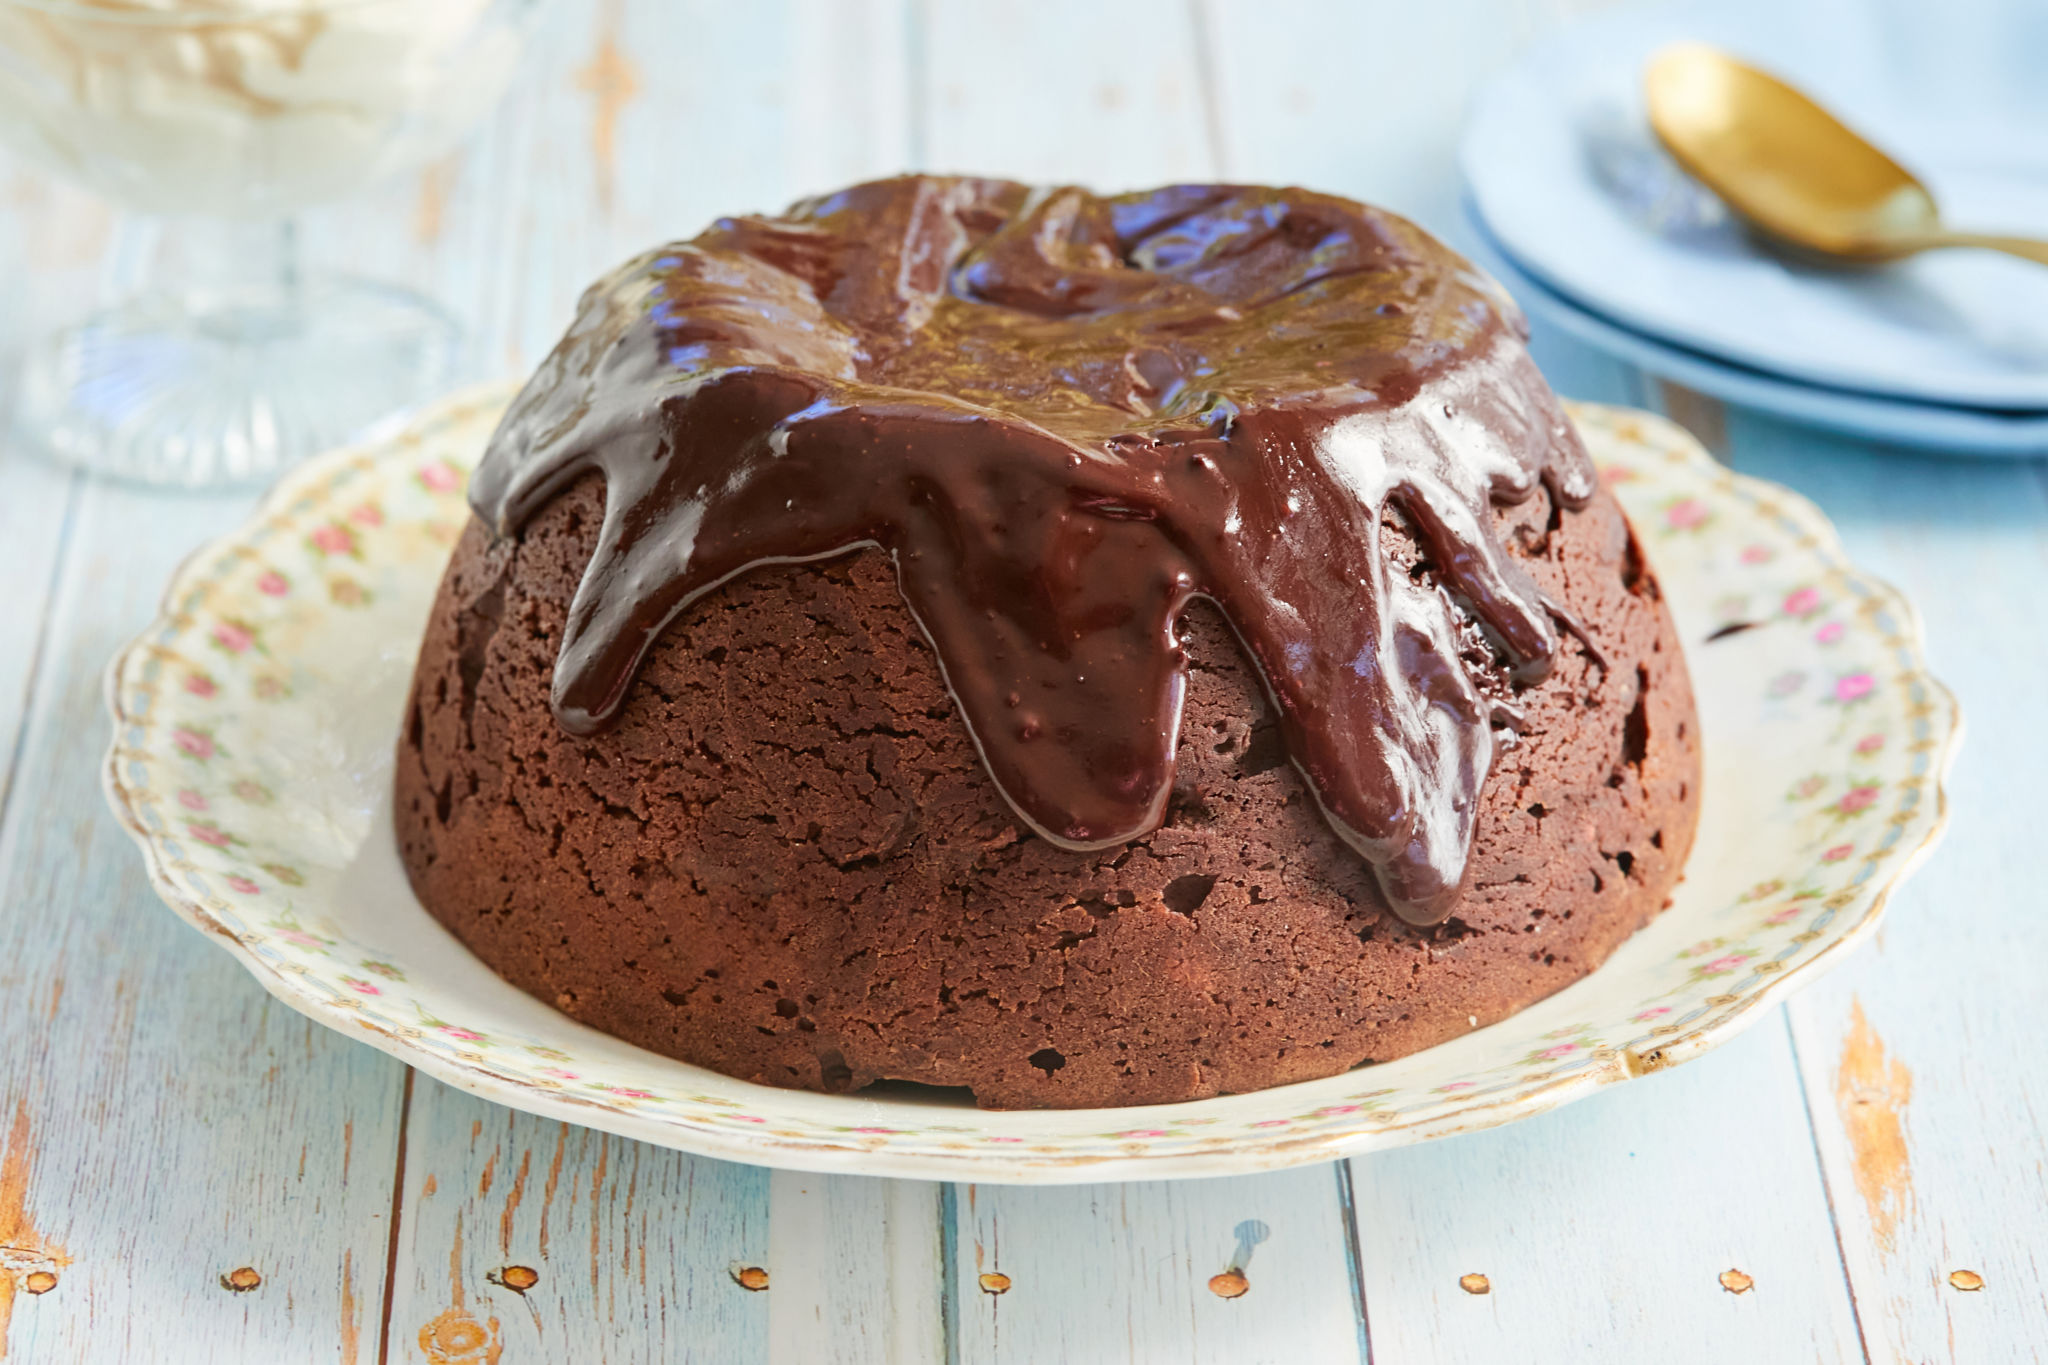 A whole steamed chocolate pudding.